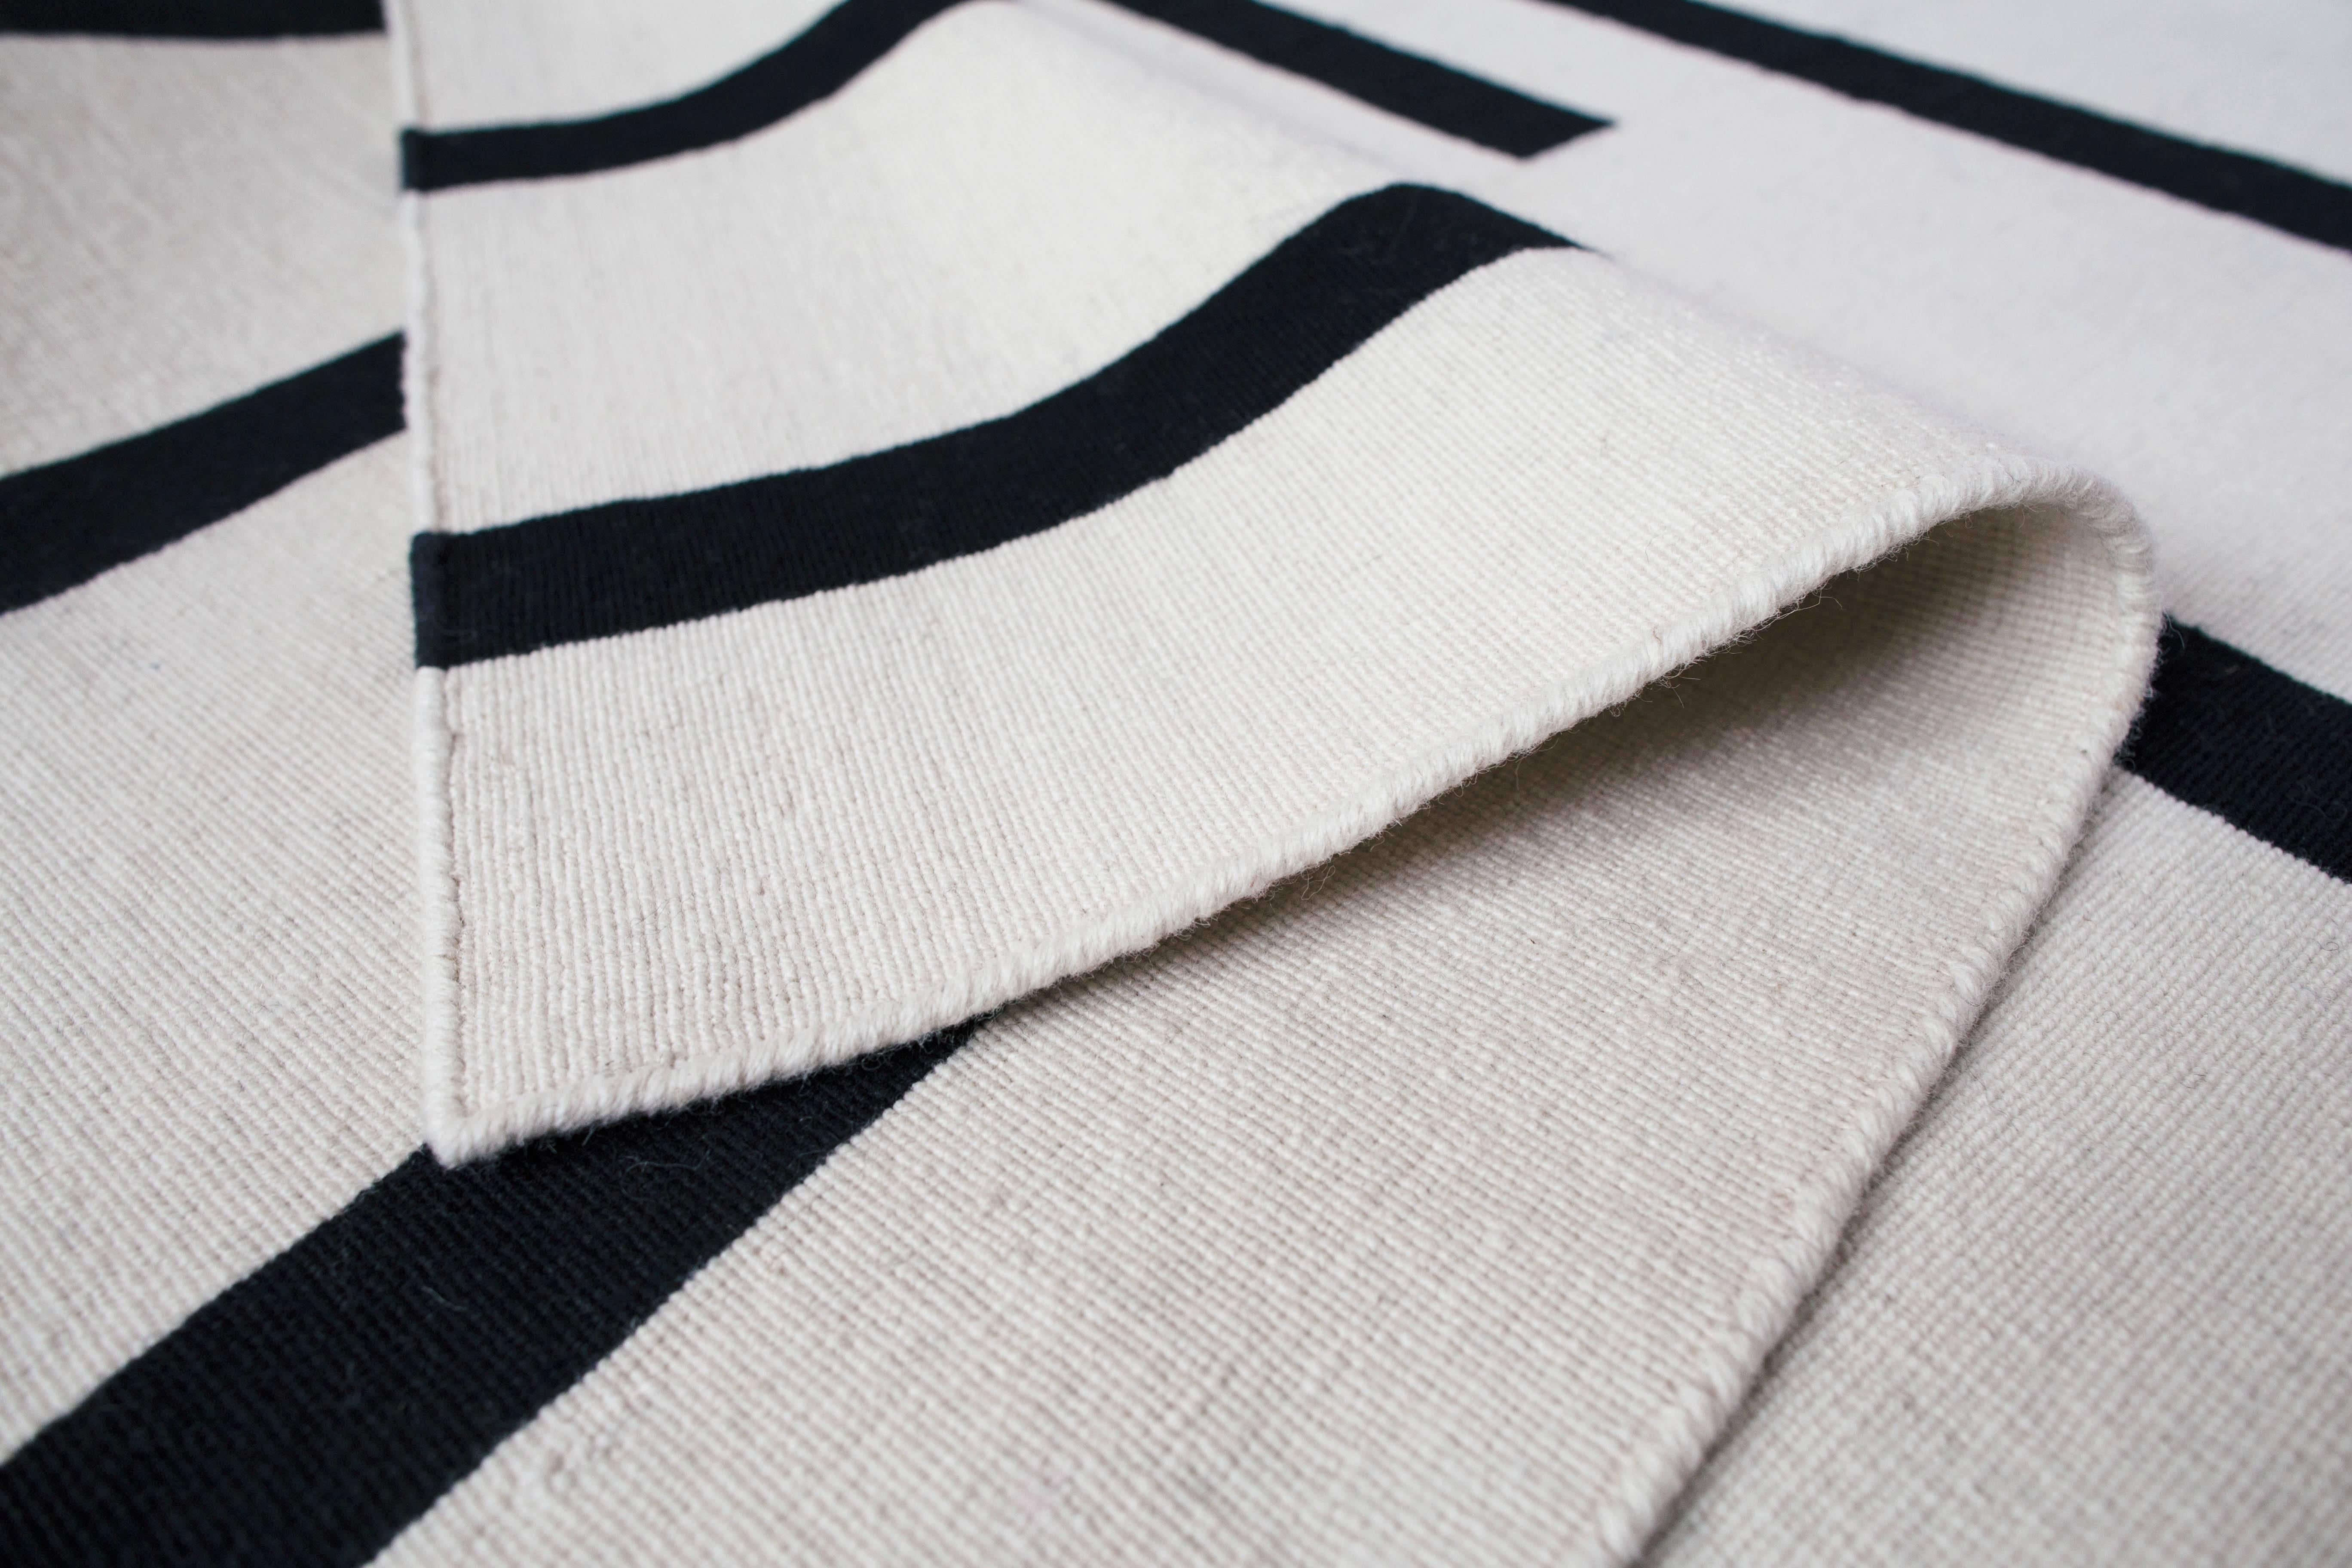 Tiger Cream/Black is a modern Dhurrie/Kilim rug in Scandinavian design.
Please note that lead times vary by size and range from 6 days - 16 weeks.

Our Swedish tiger has bold black stripes on muted colors that will add both character and warmth to